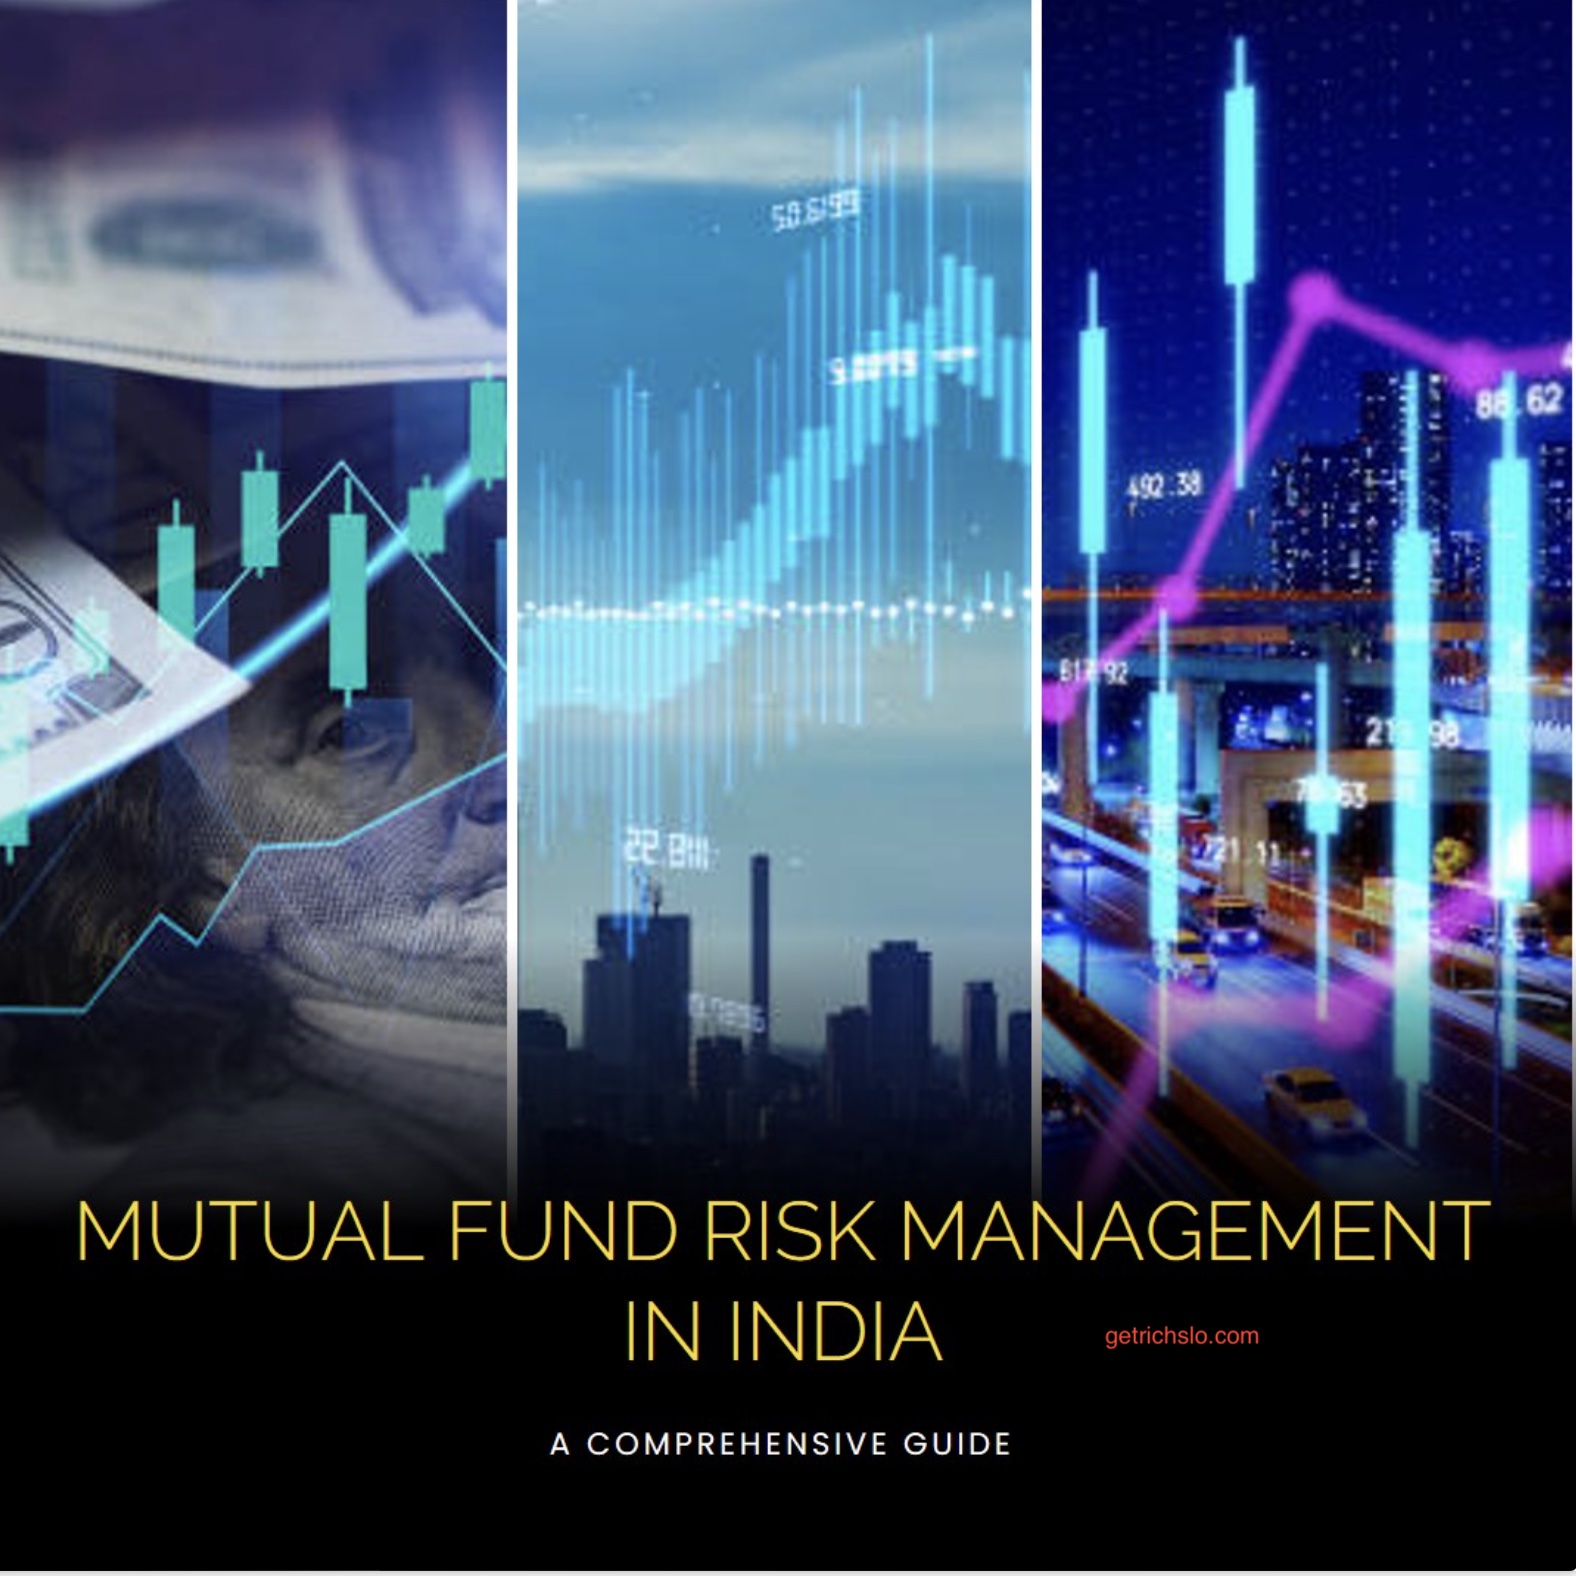 Comprehensive Guide to Mutual Fund Risk Management in India